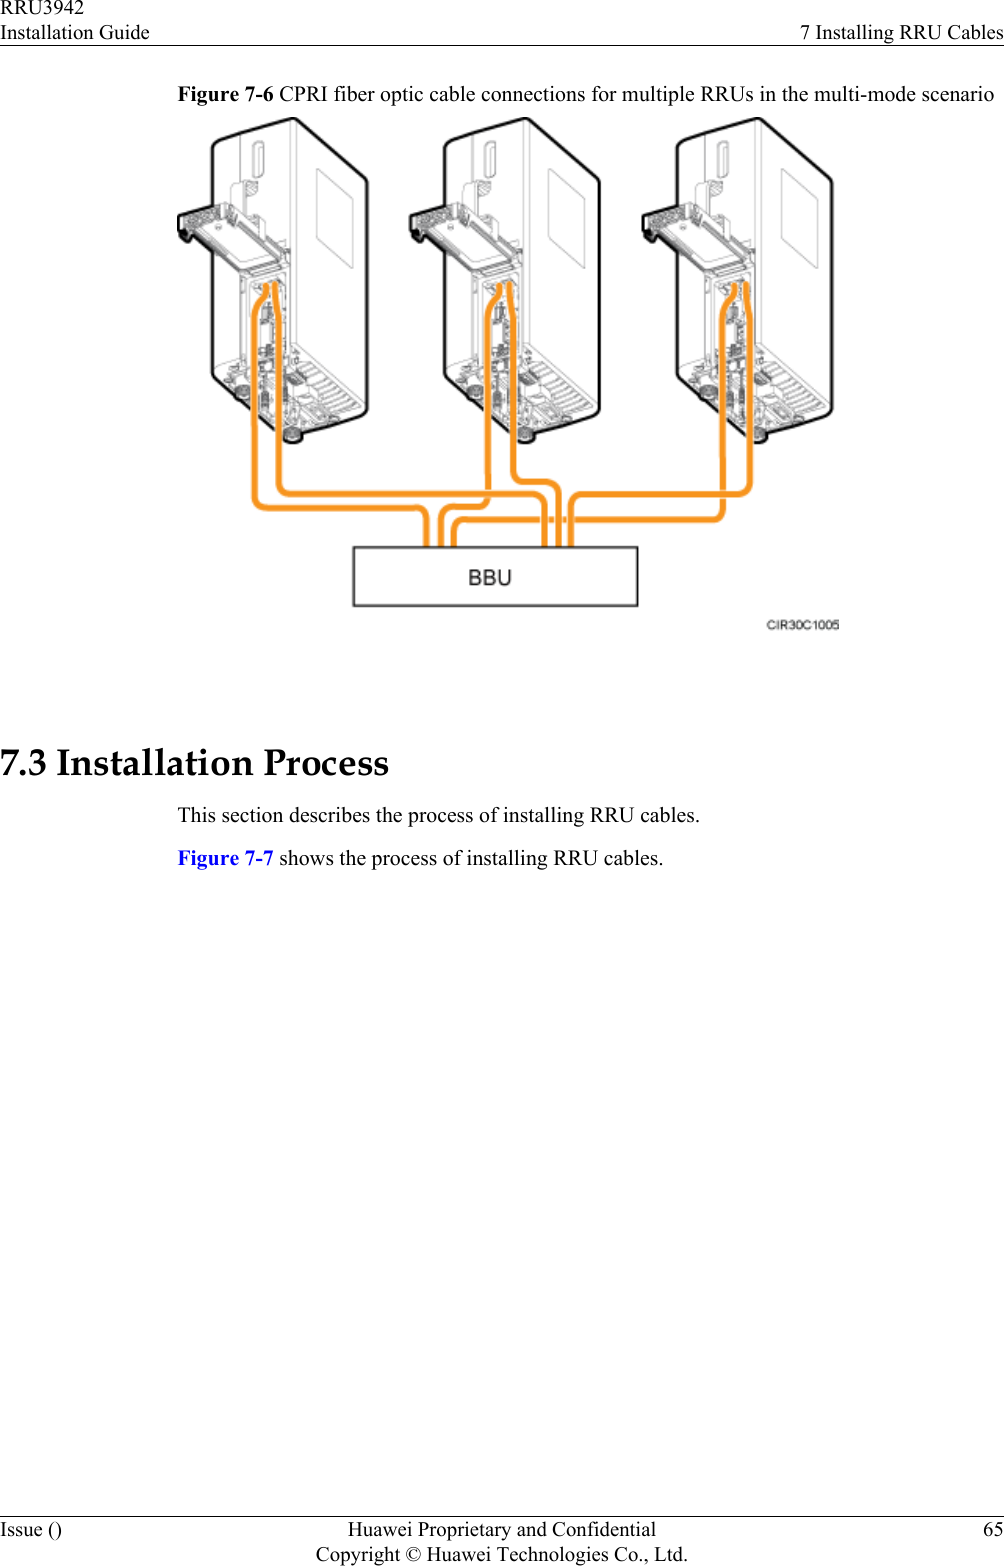 Figure 7-6 CPRI fiber optic cable connections for multiple RRUs in the multi-mode scenario 7.3 Installation ProcessThis section describes the process of installing RRU cables.Figure 7-7 shows the process of installing RRU cables.RRU3942Installation Guide 7 Installing RRU CablesIssue () Huawei Proprietary and ConfidentialCopyright © Huawei Technologies Co., Ltd.65